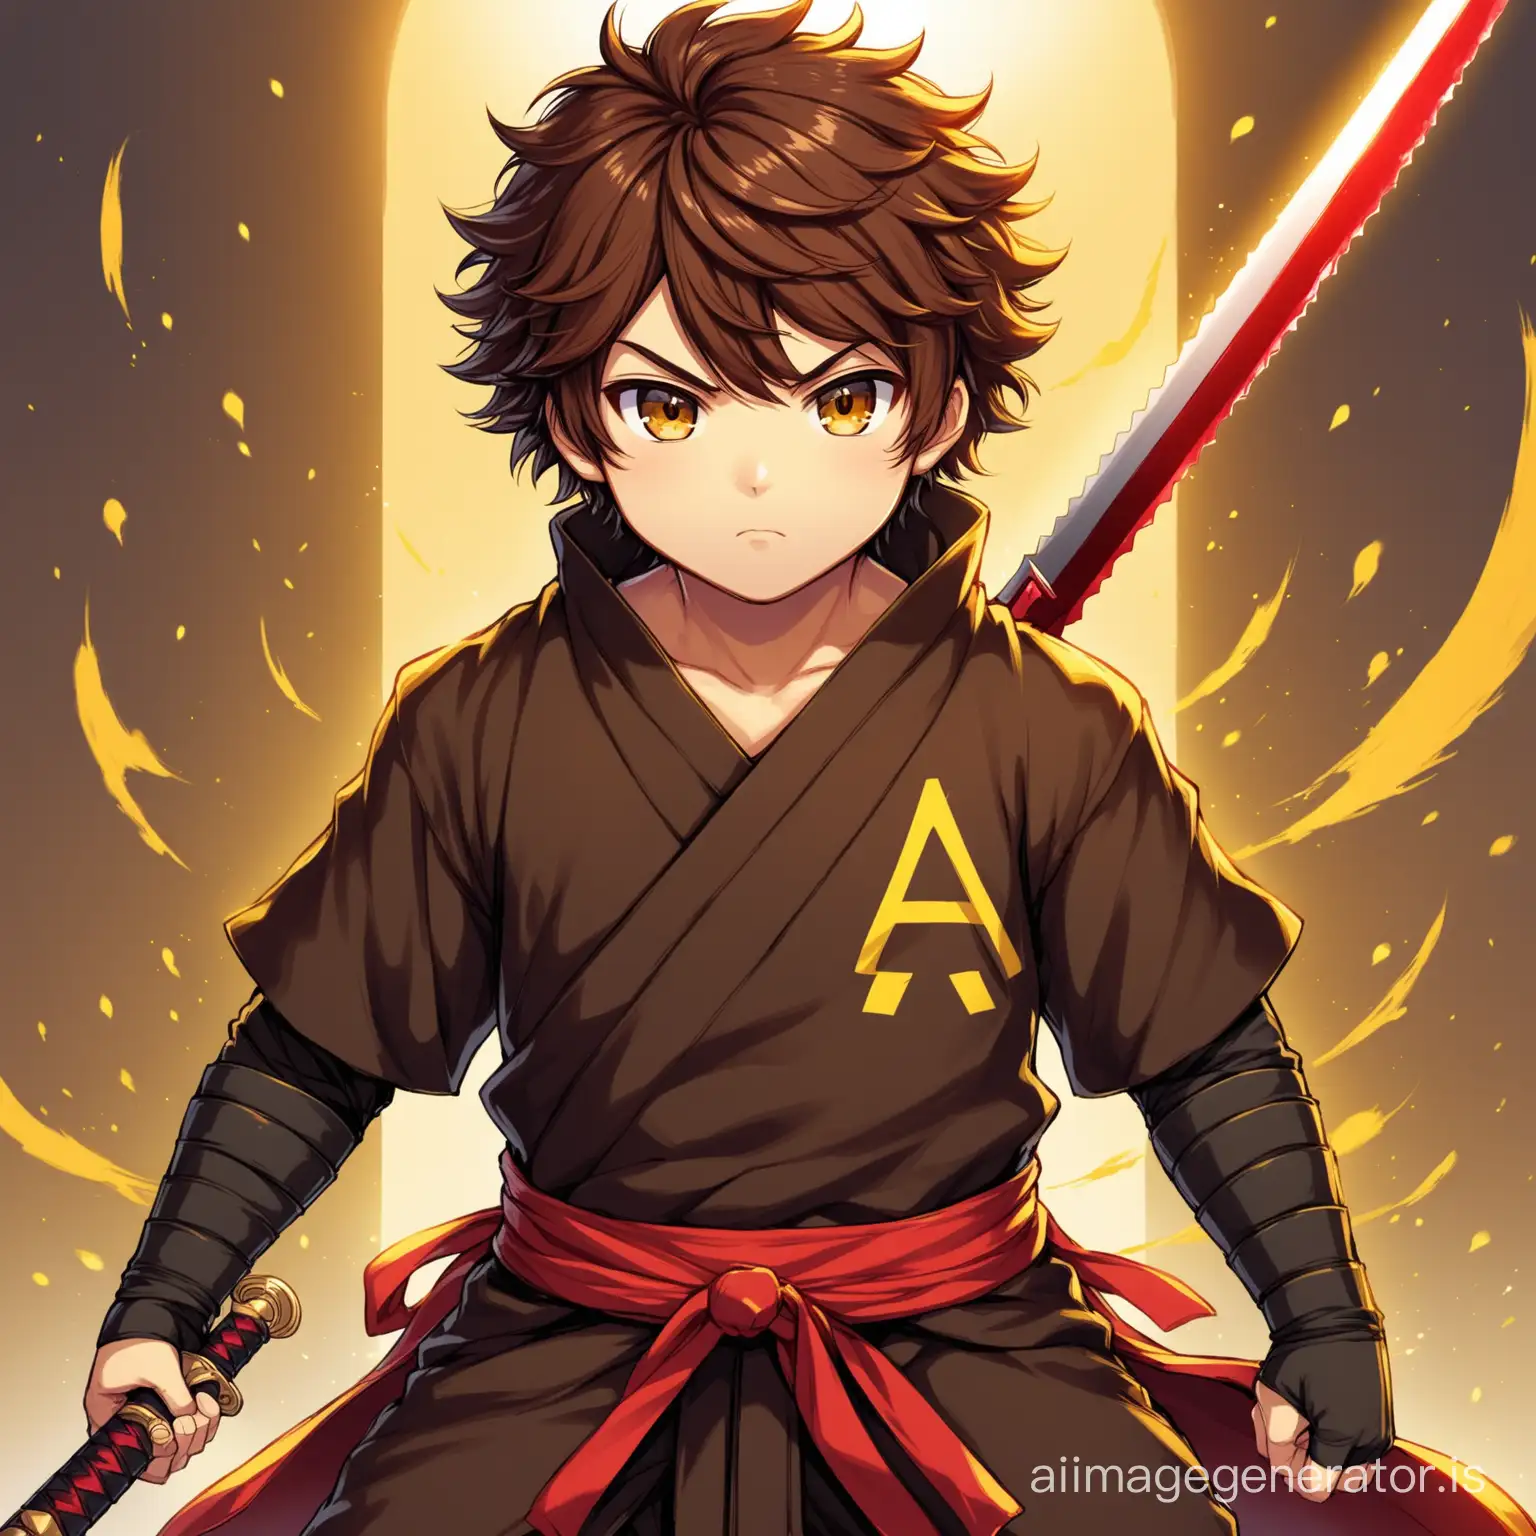 Boy Brown fluffy hair and Brown eyes ninja wearing all yellow with an A on the middle of the shirt and holding a red sword